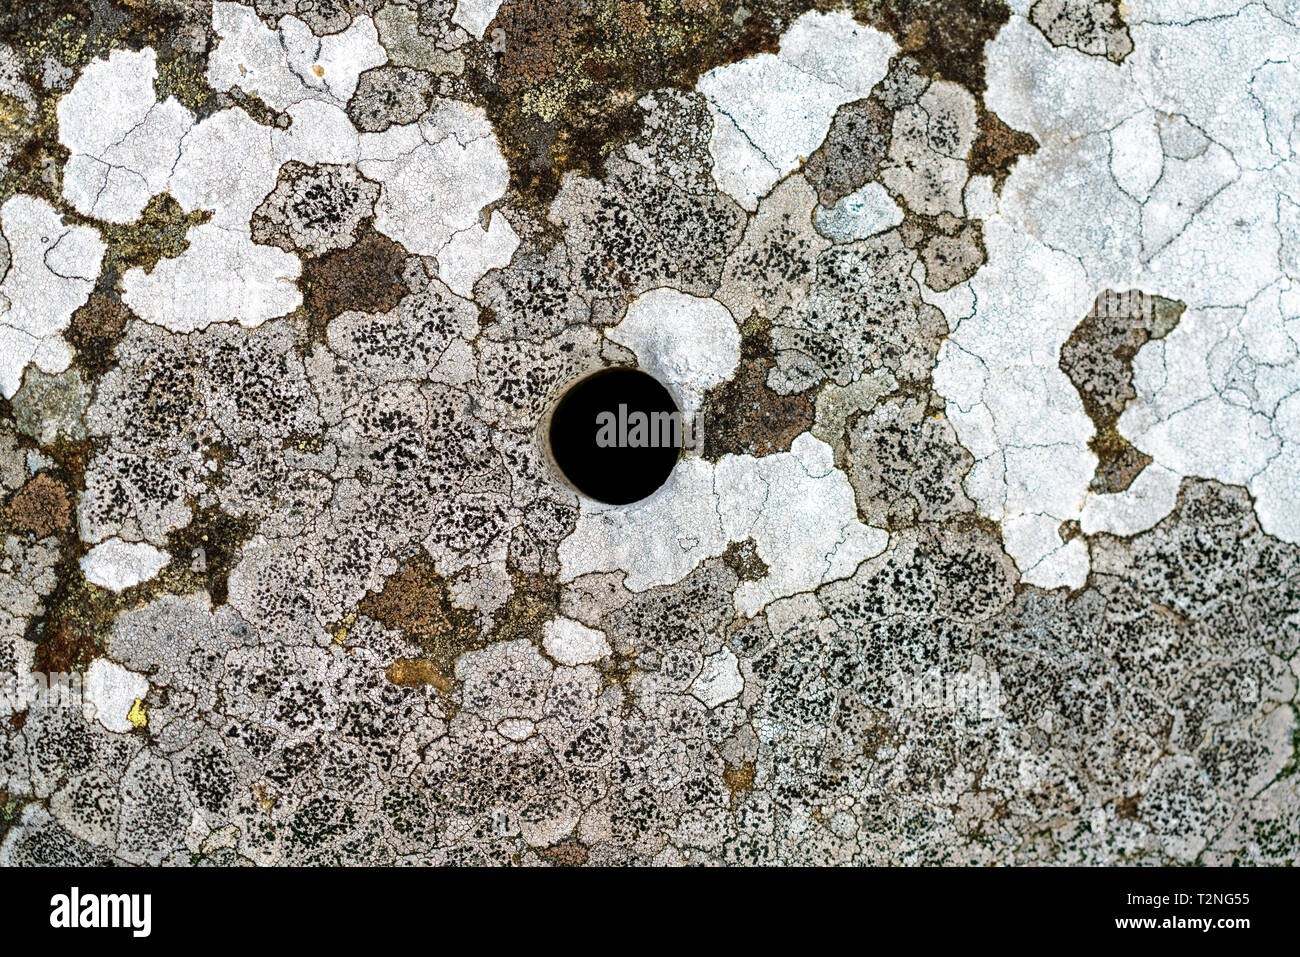 Lichen of different species on a rock Stock Photo